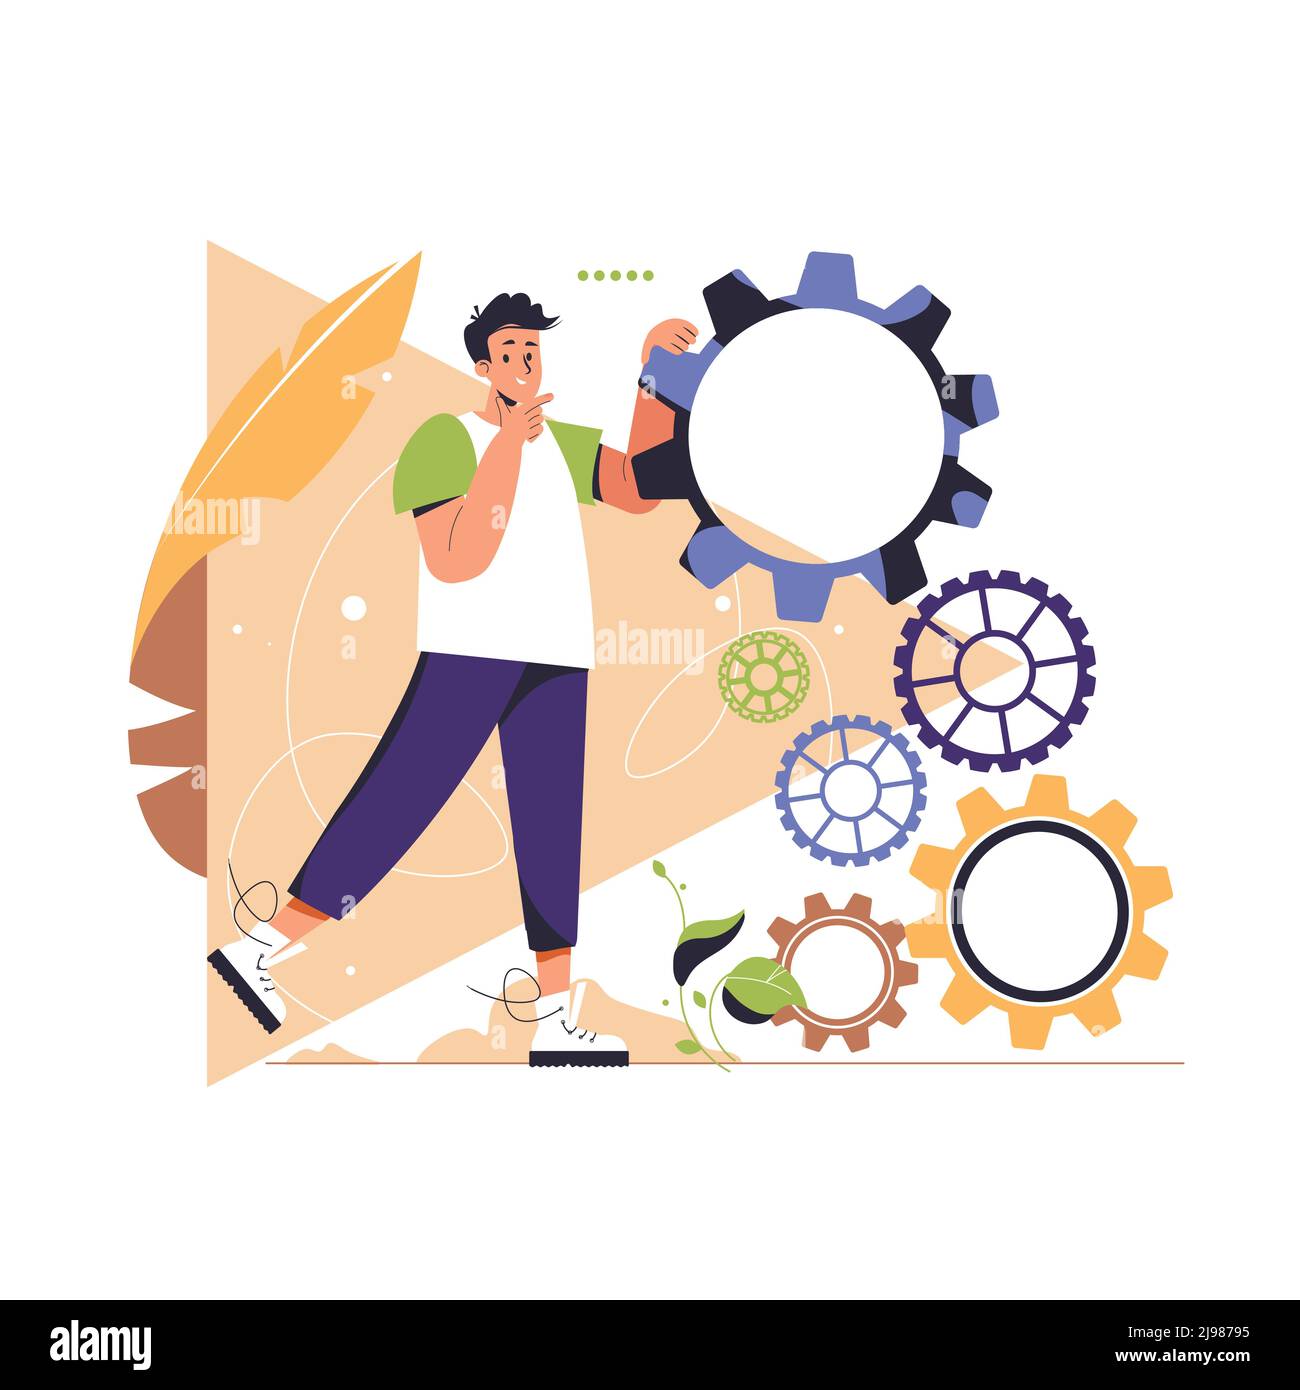 Man with logical, technical, structural thinking. Different mental mindset types or models. Mind behaviour, mental perceiving, psychological concept. Color flat vector illustration isolated on white.  Stock Vector